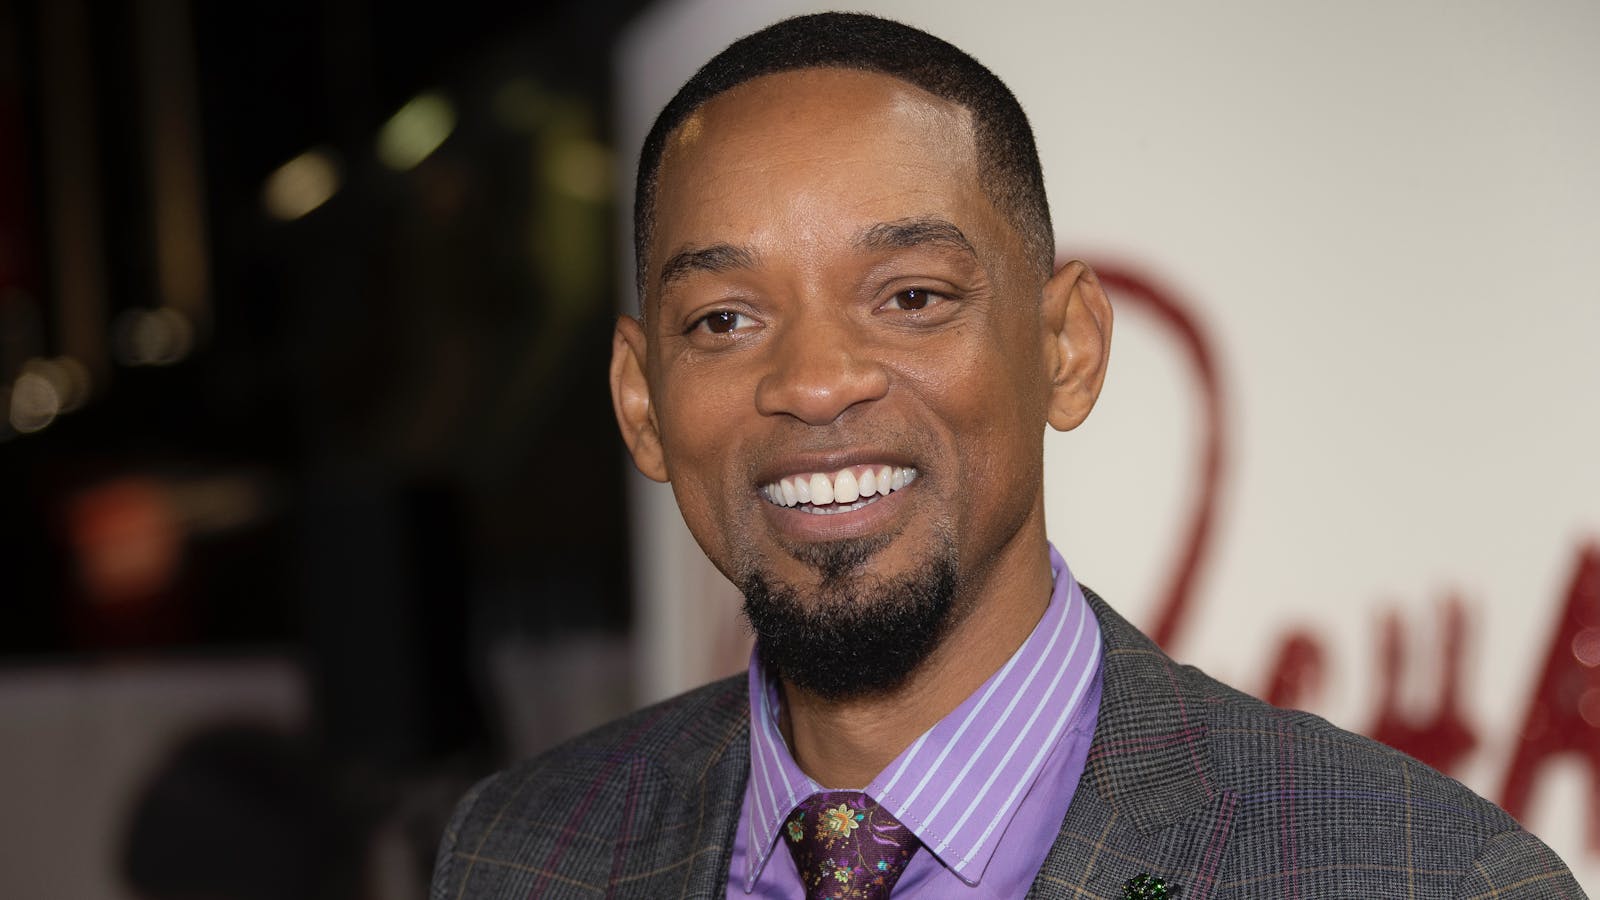 Will Smith. Photo by AP